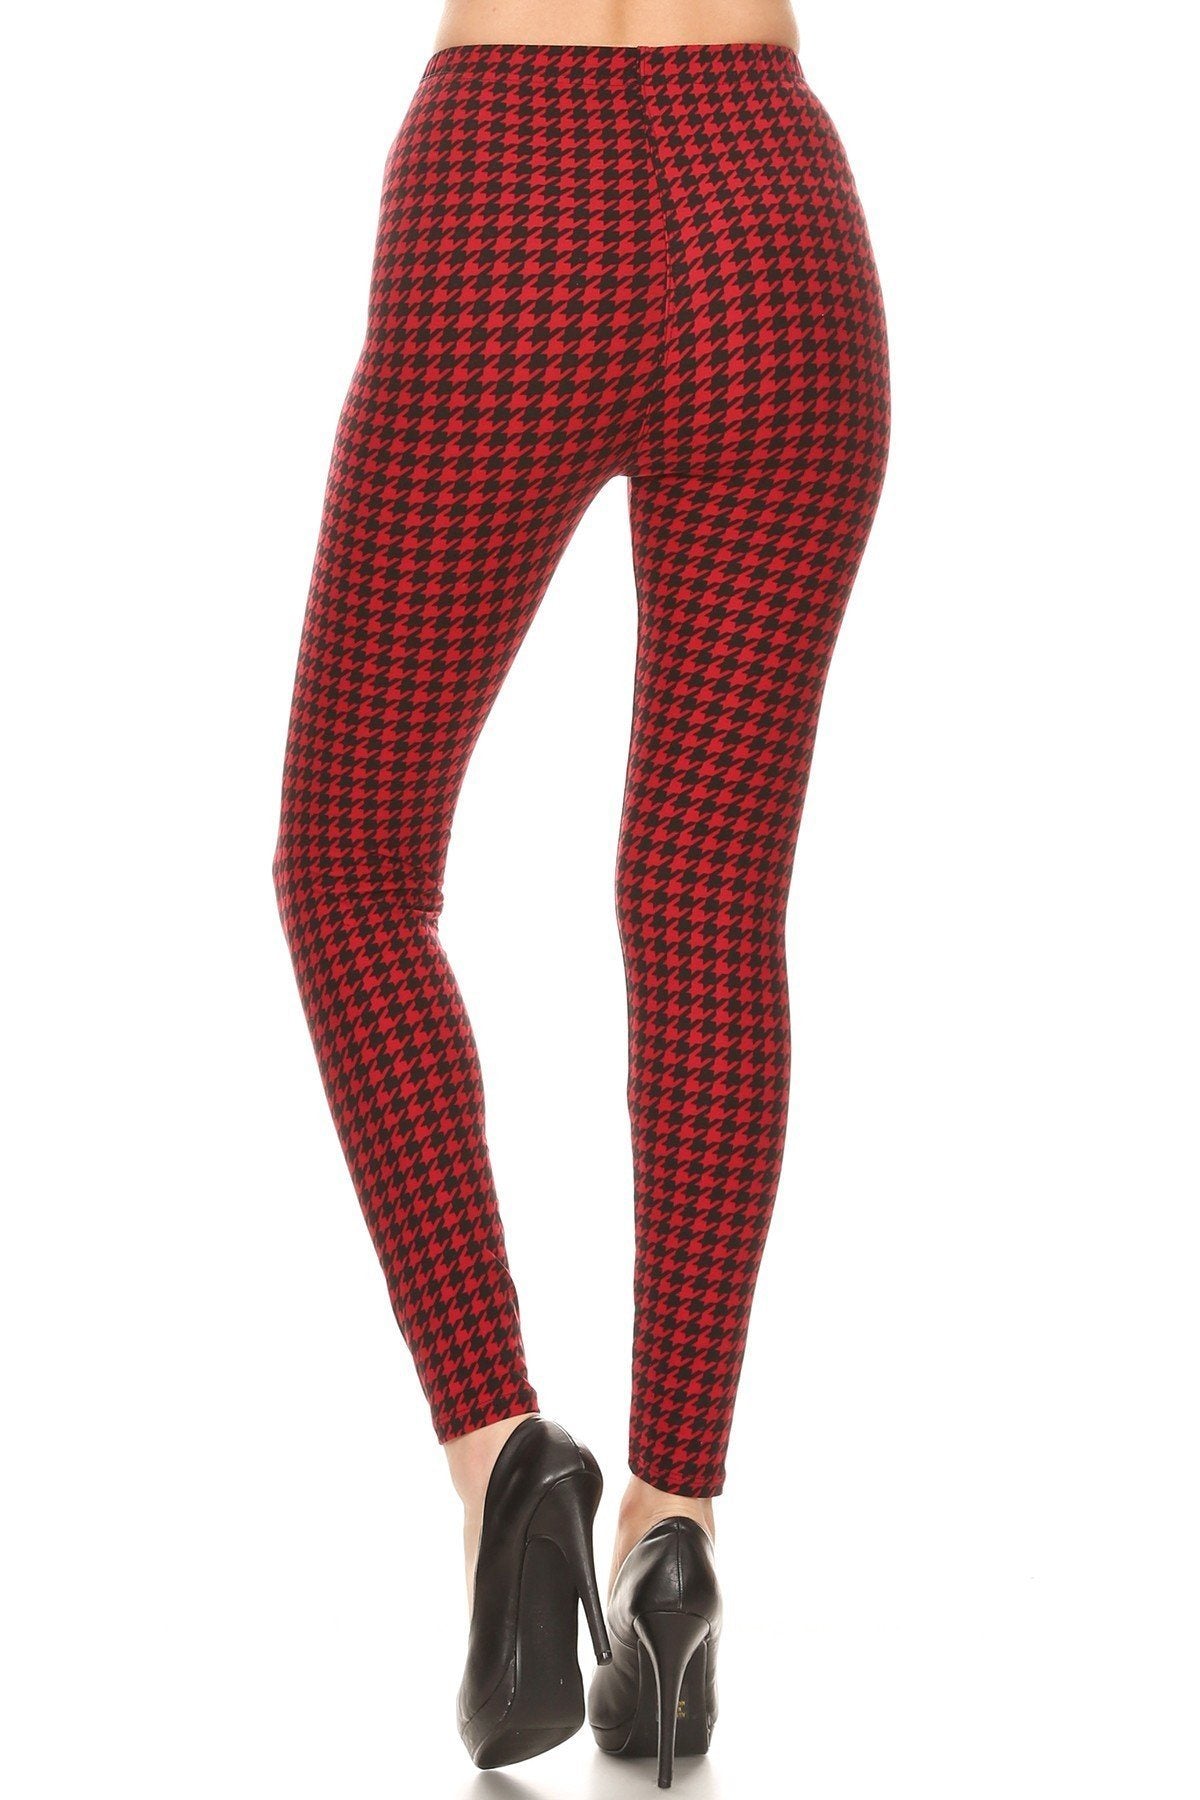 High Rise Hounds Tooth Print Fitted Leggings